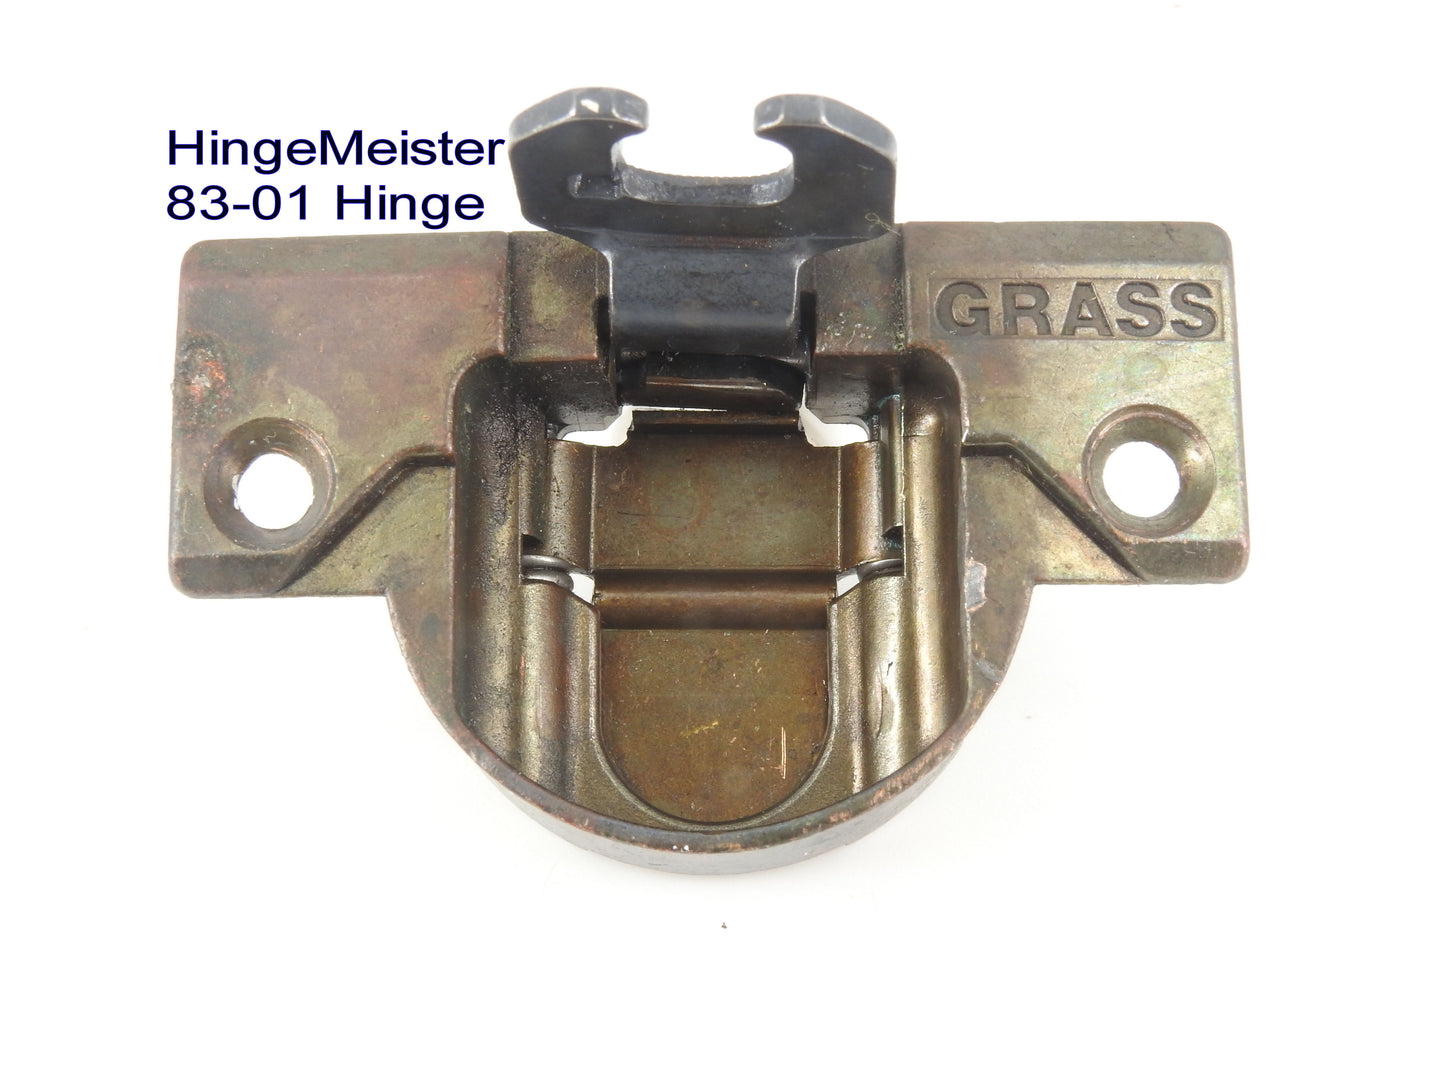 Grass 83-01 Hinge "Cup only" Bronze Finish - Rare - preowned